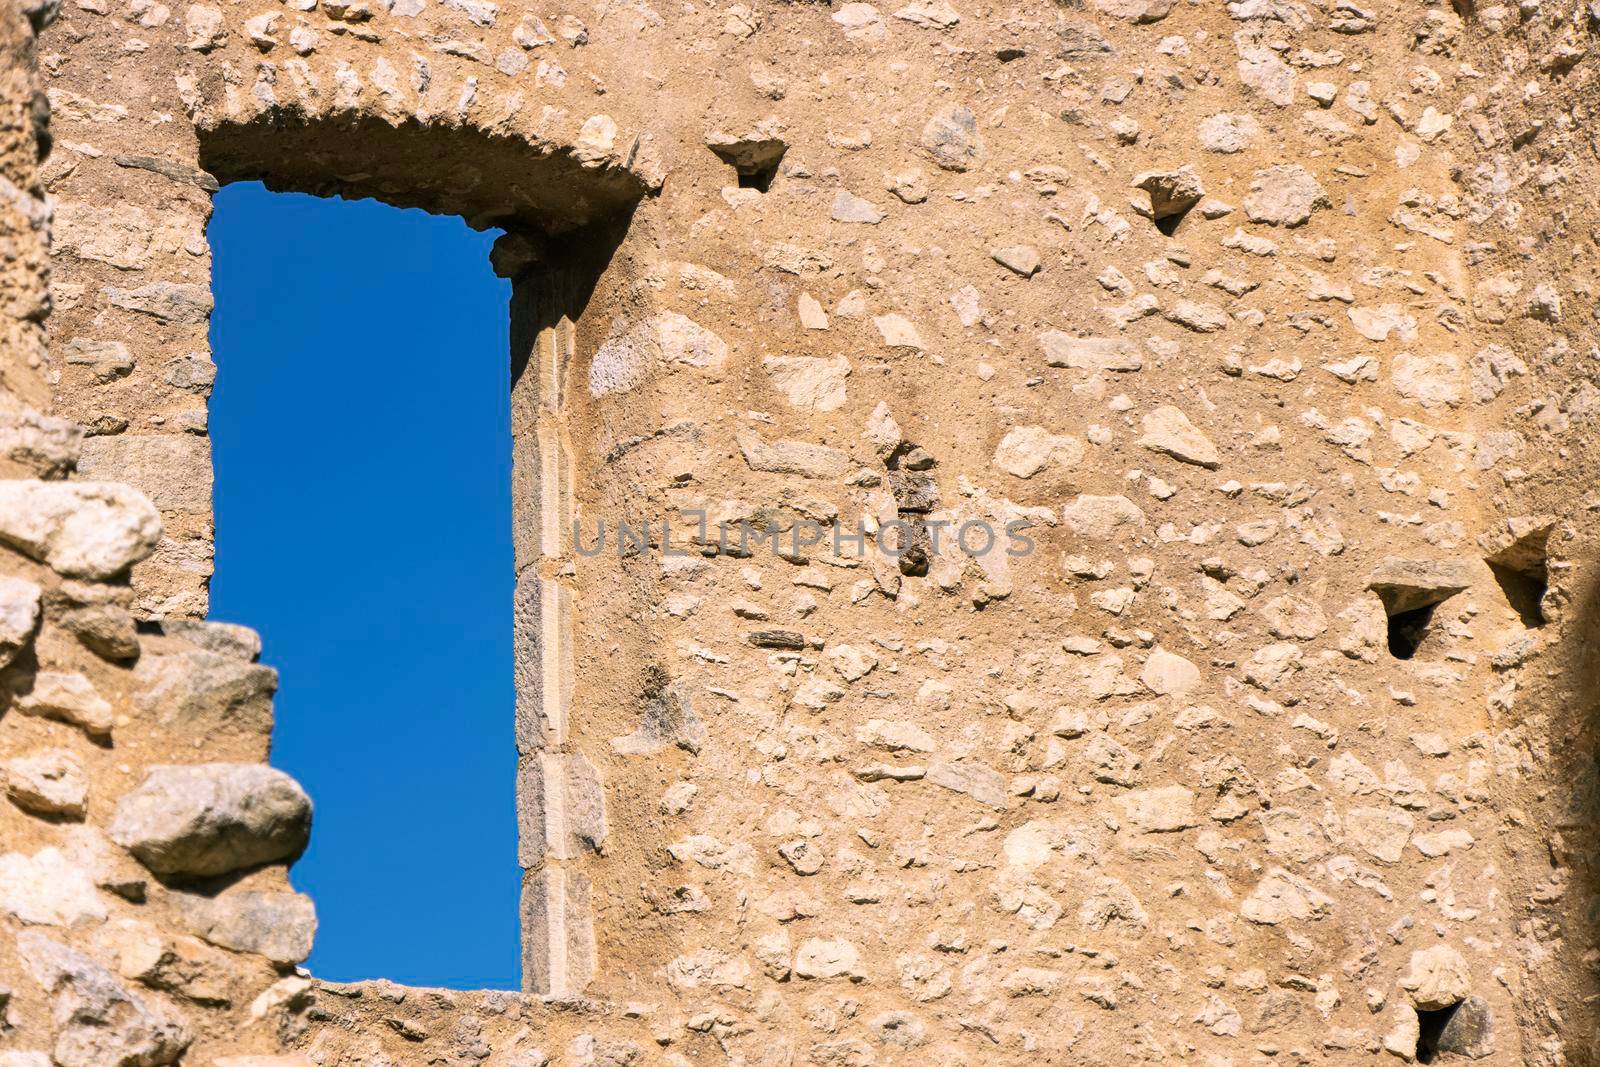 Stone window and brickwork of Chateau de Miglos, or d'Arquizat, a ruined castle in Miglos, Ariege, Occitanie, France. It is a listed national historic monument of France.